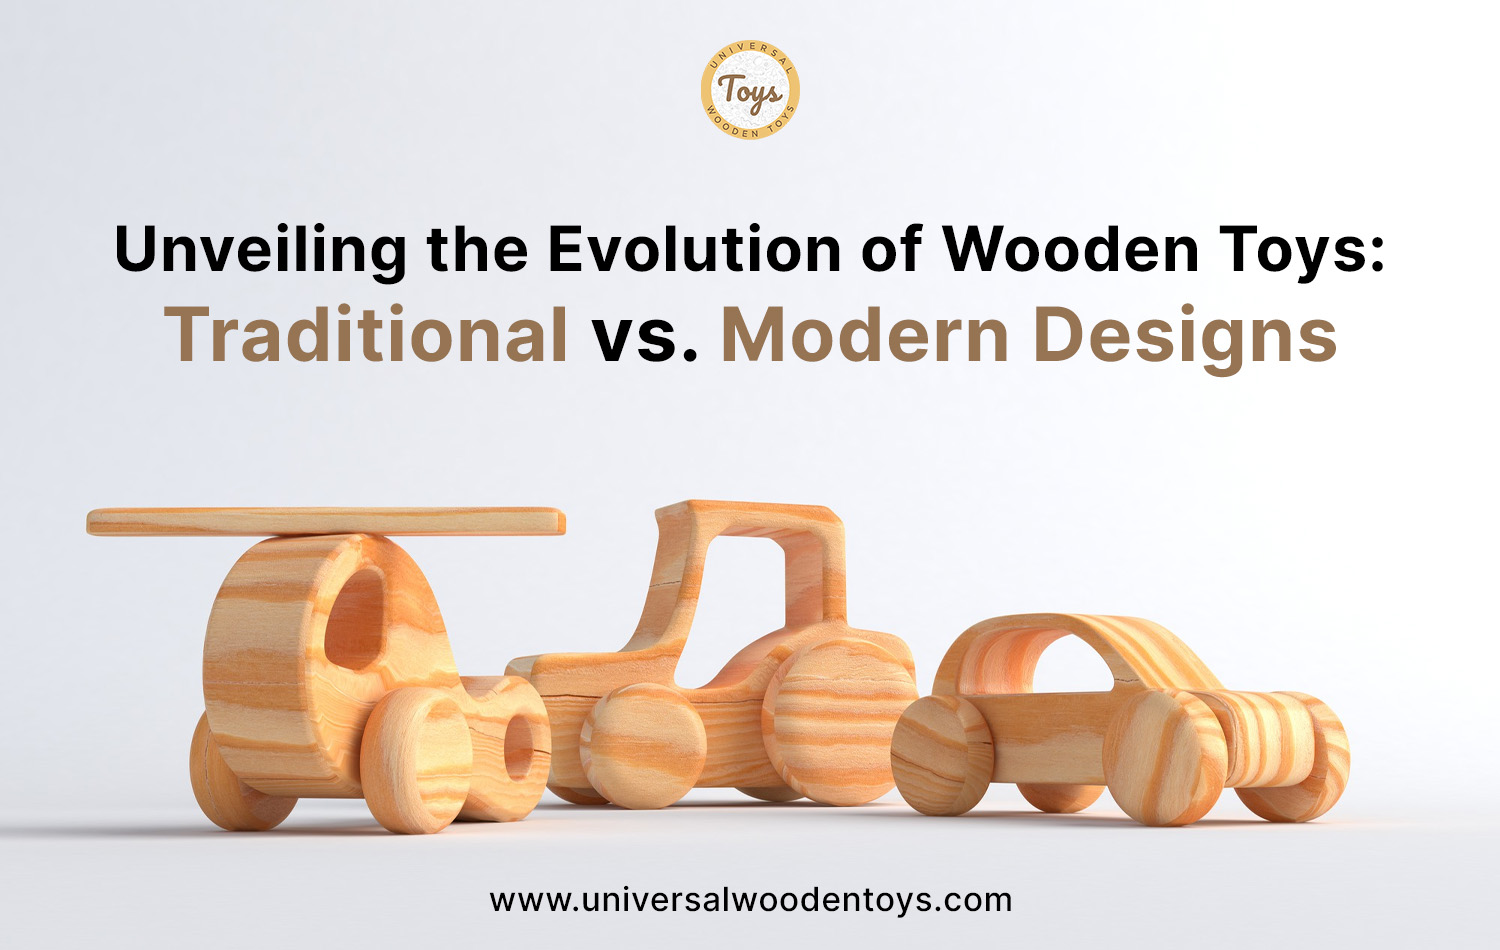 Traditional vs. Modern Wooden Toys Designs